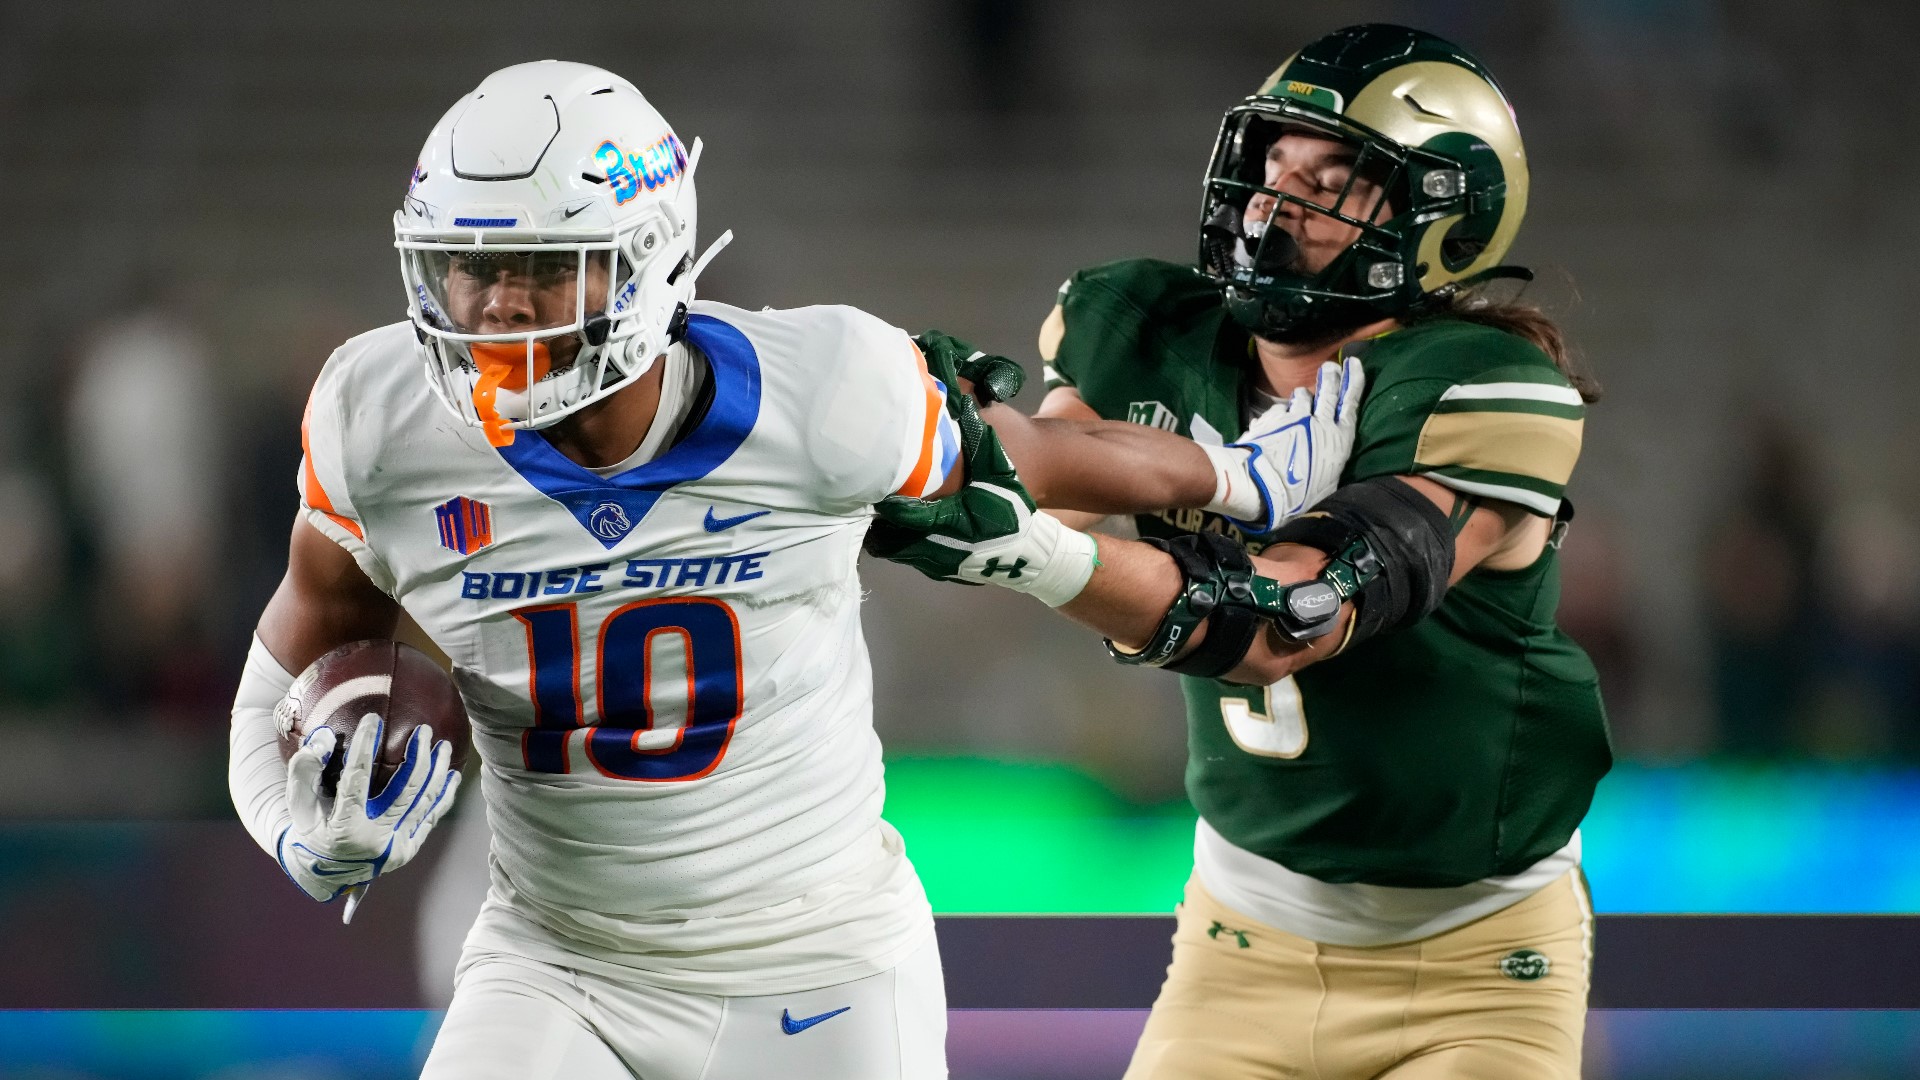 Washington State and Portland State are coming to The Blue in 2024. Boise State will now visit Oregon on Sept. 7 as part of a change to the series with the Ducks.